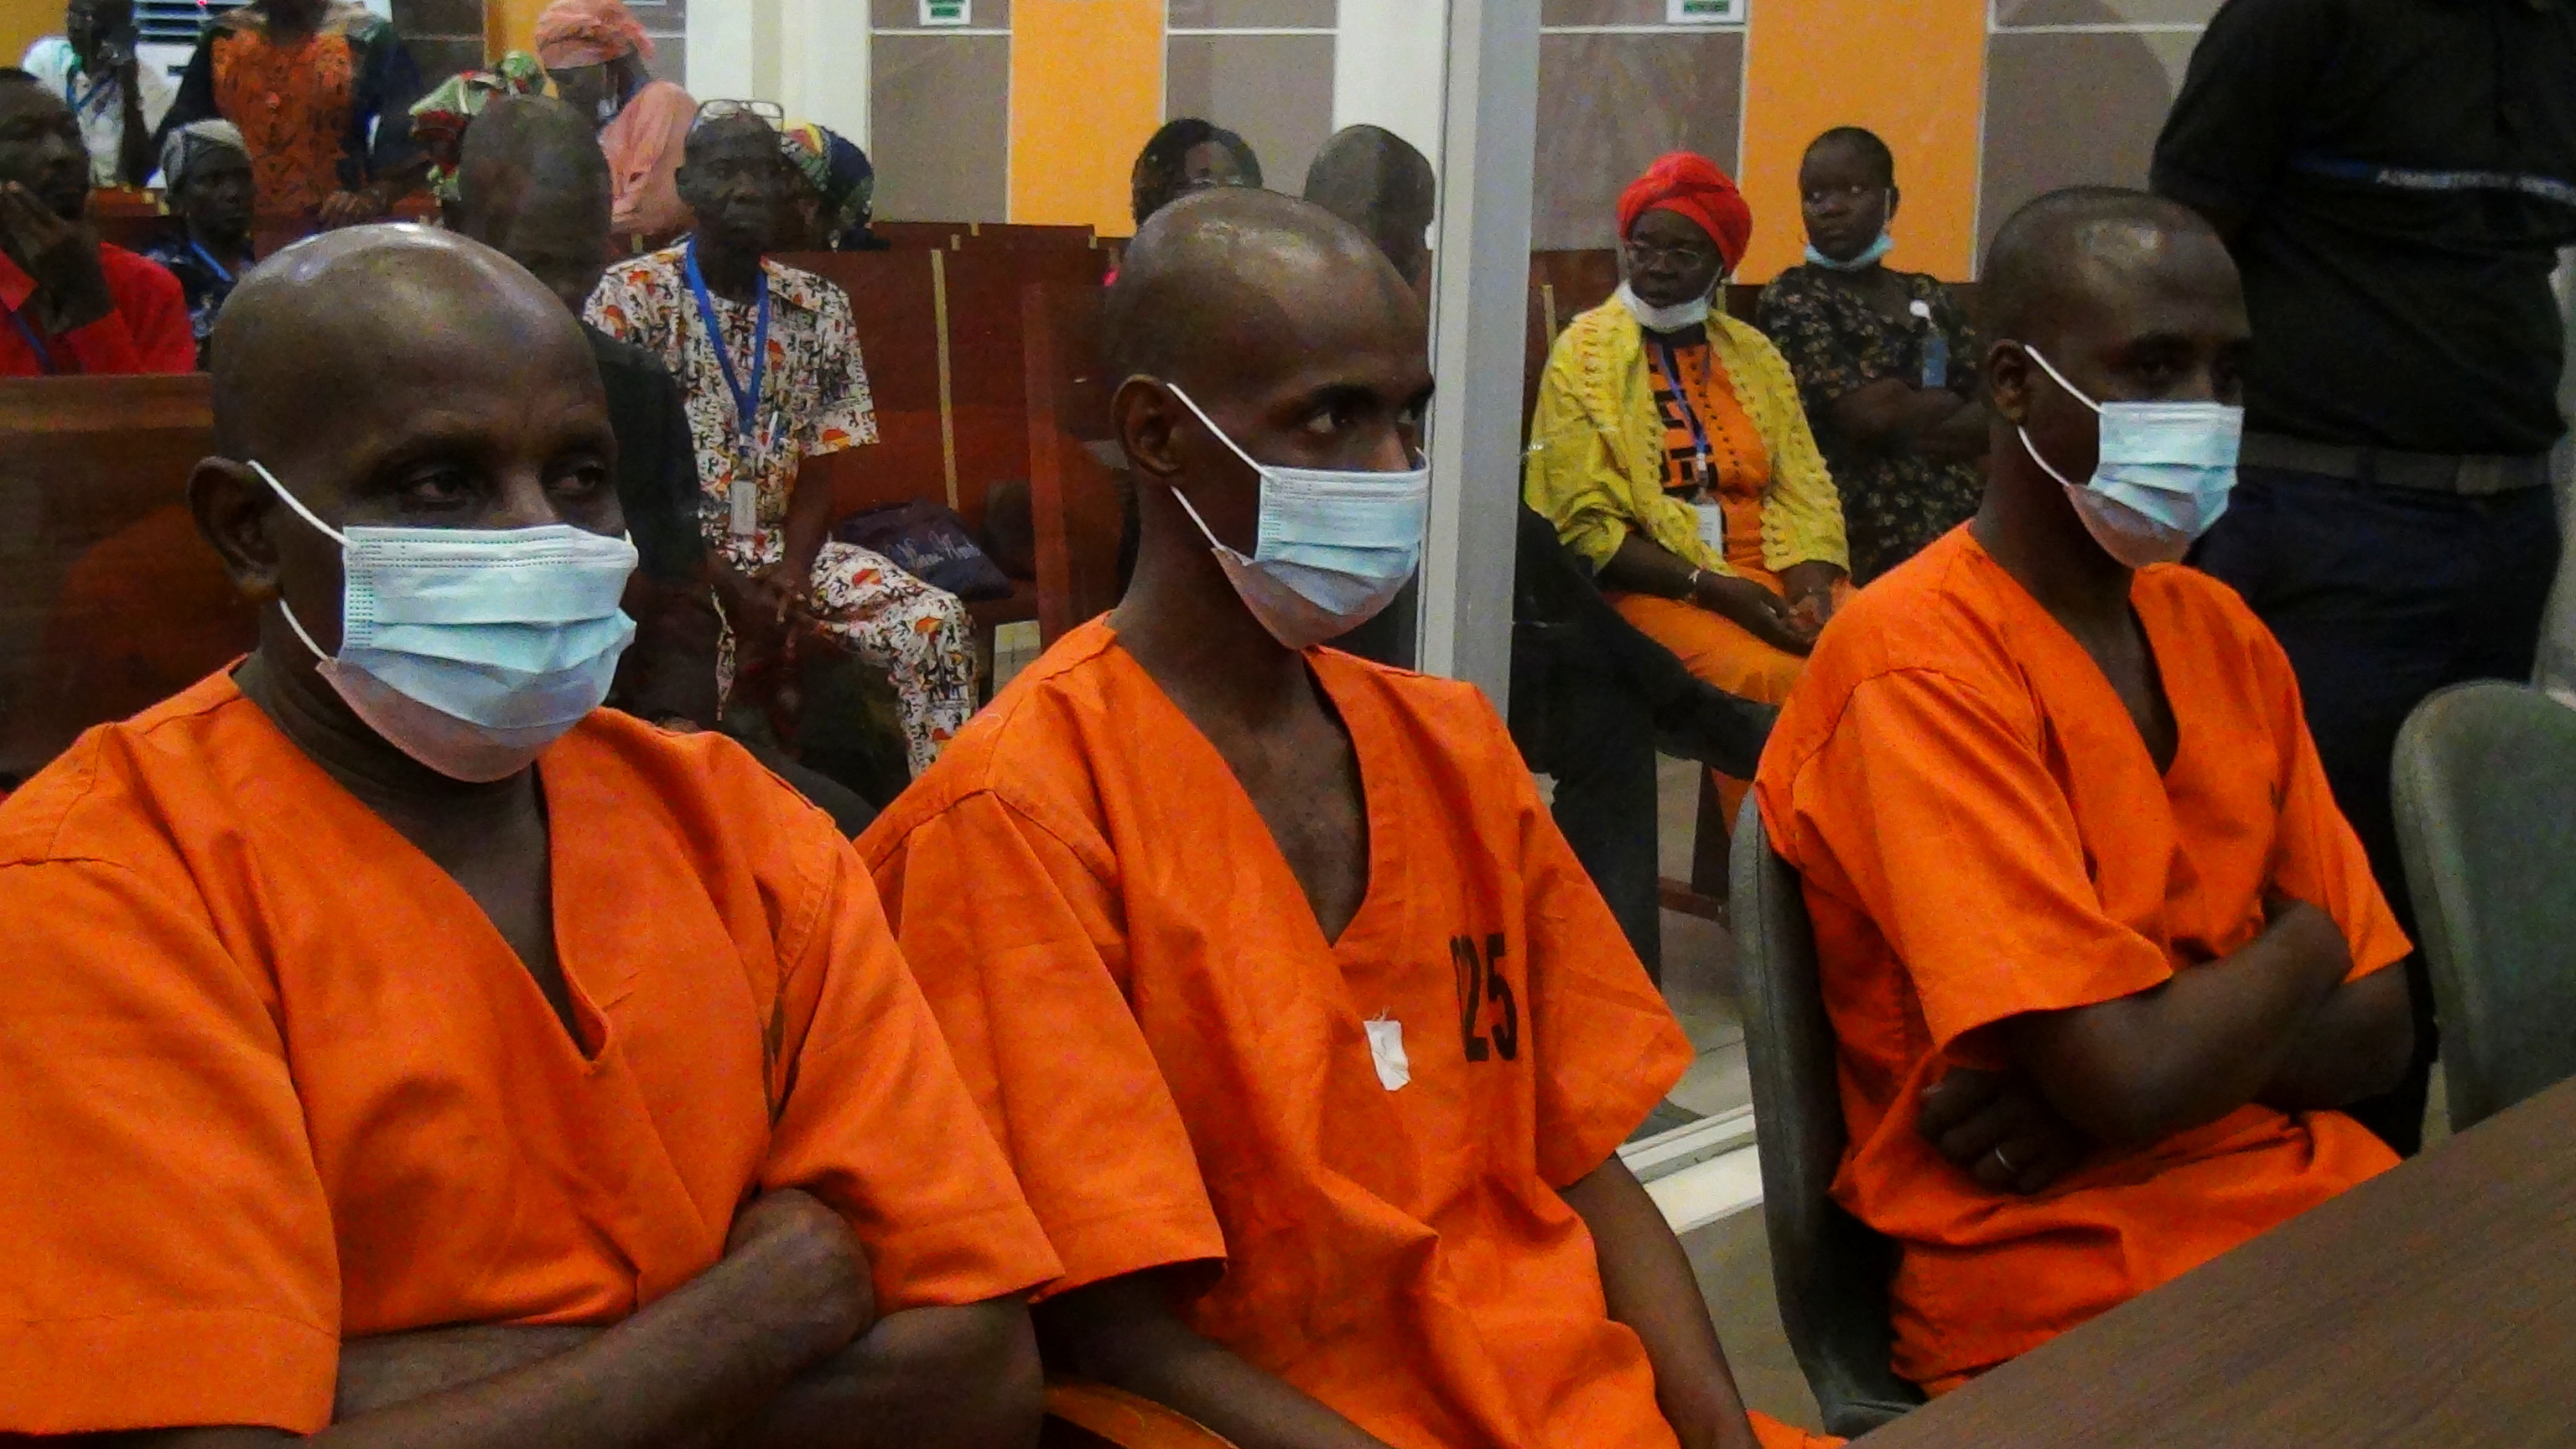 Central African Republic war crimes trial postponed after lawyer no